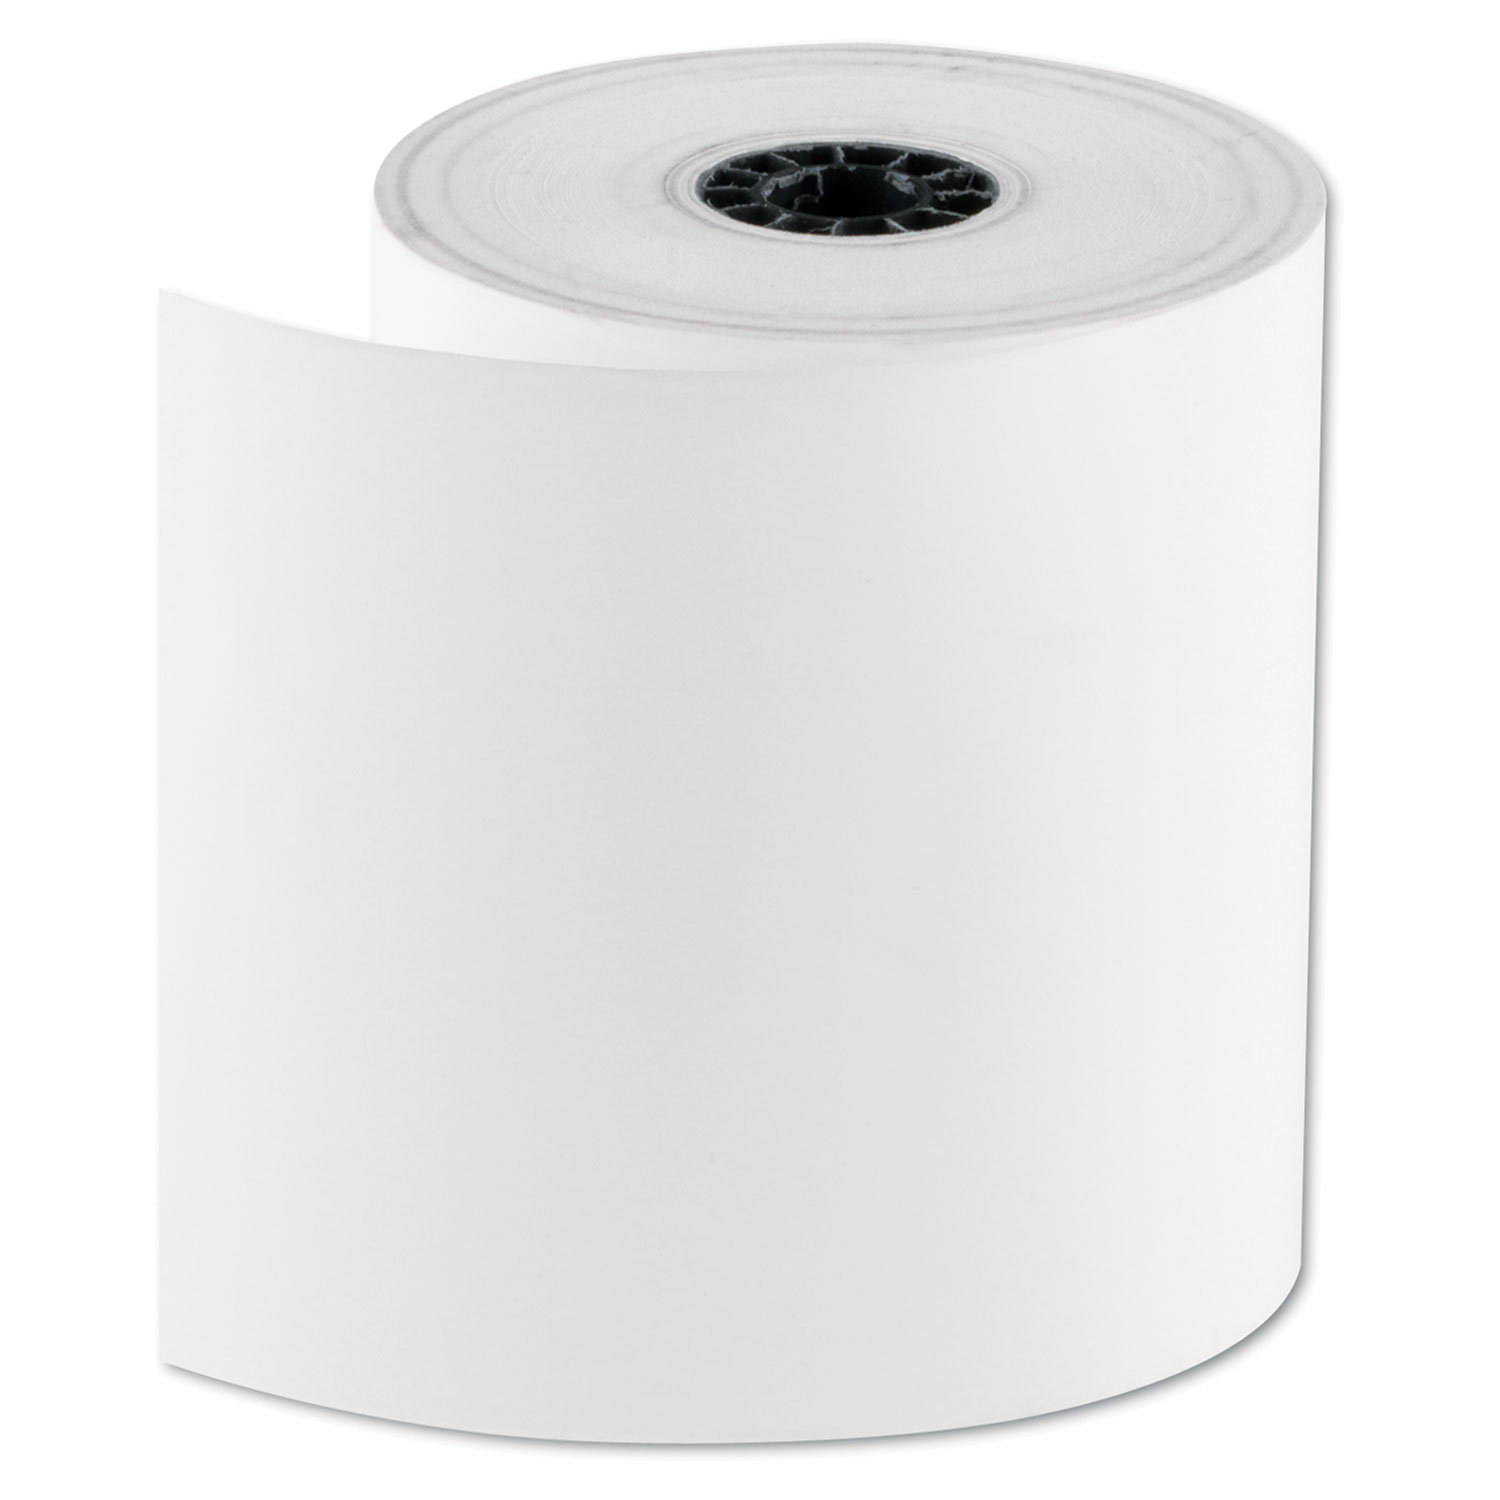  National Checking Company NTC 7313SP RegistRolls Thermal Point-of-Sale Rolls, 3.13 x 200 ft, White, 30/Carton (NTC7313SP) 